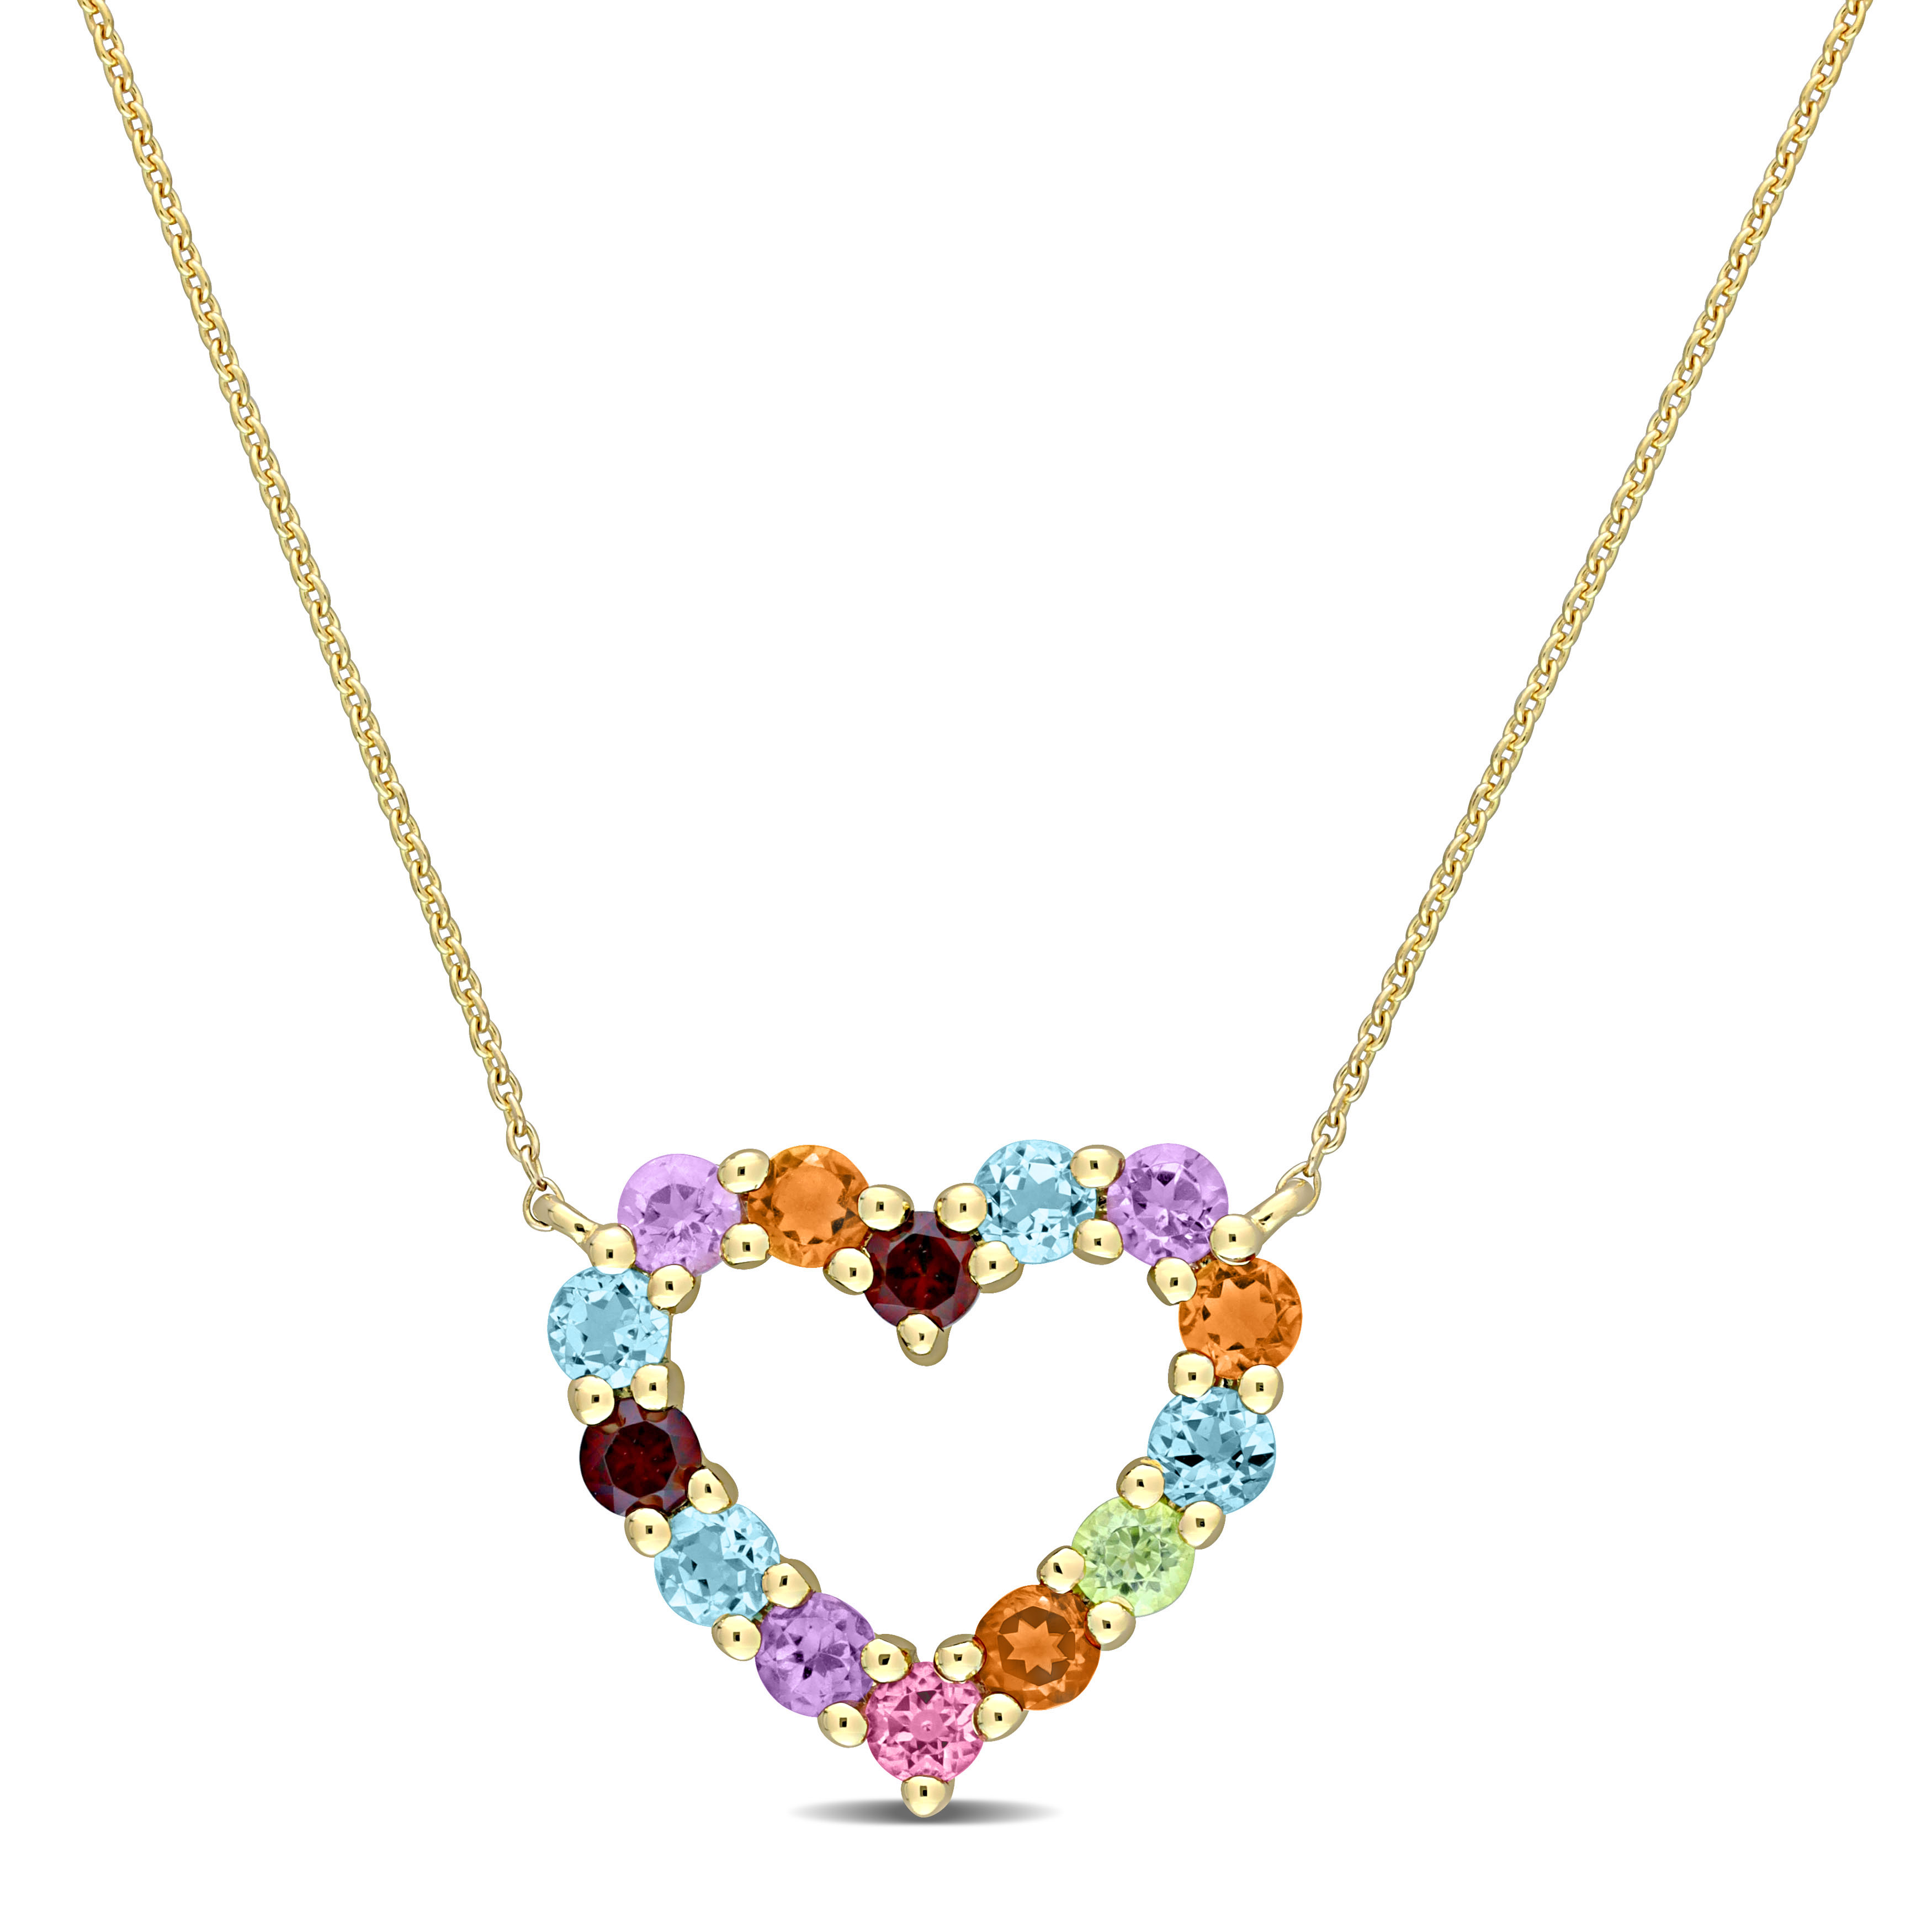 1 CT TGW Multi-Color Gemstone Open Heart Pendant with Chain in 10k Yellow Gold